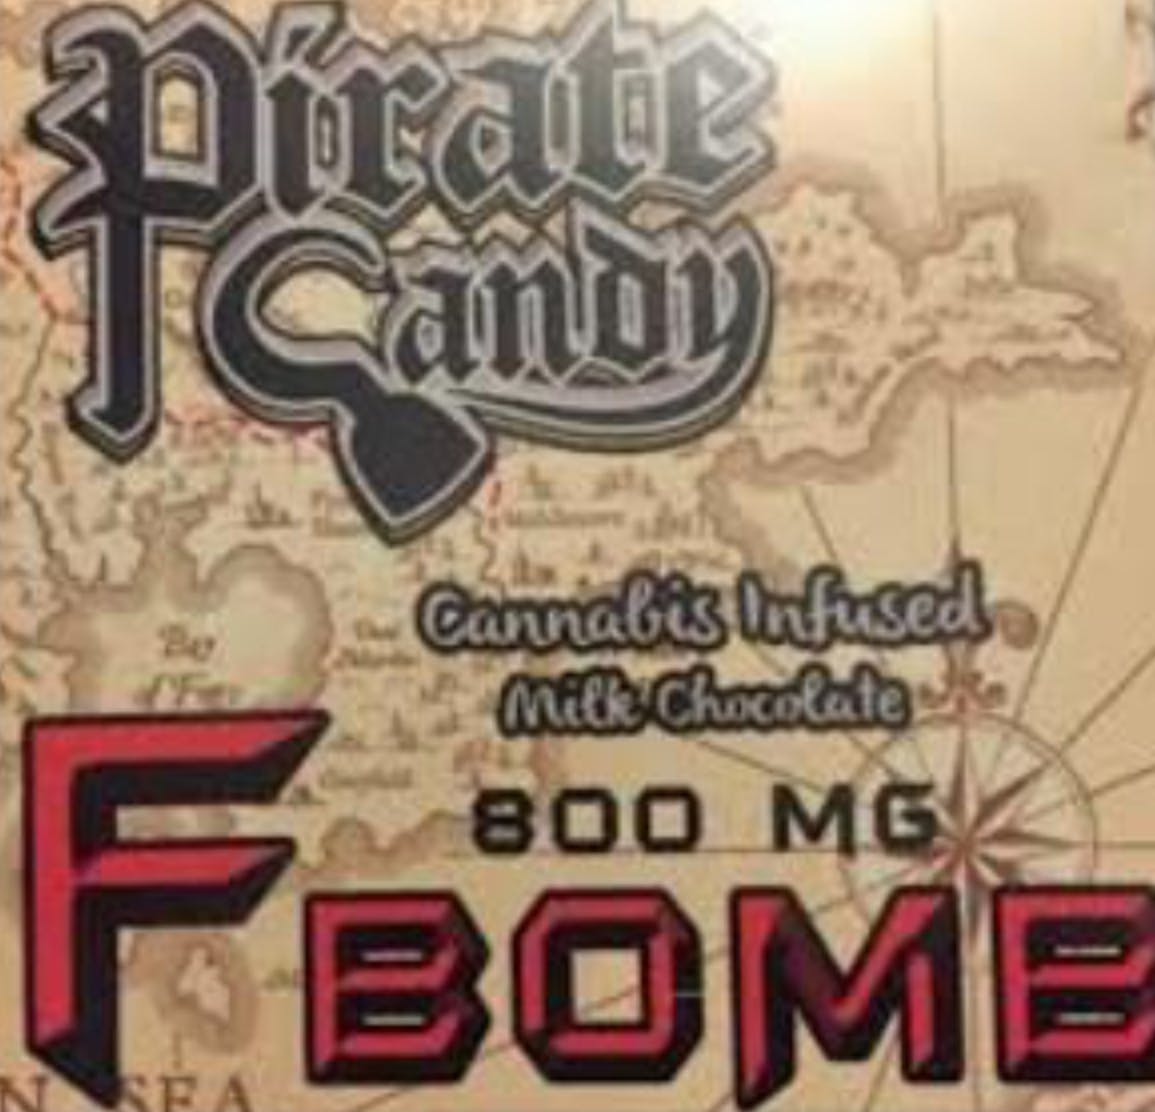 edible-pirate-candy